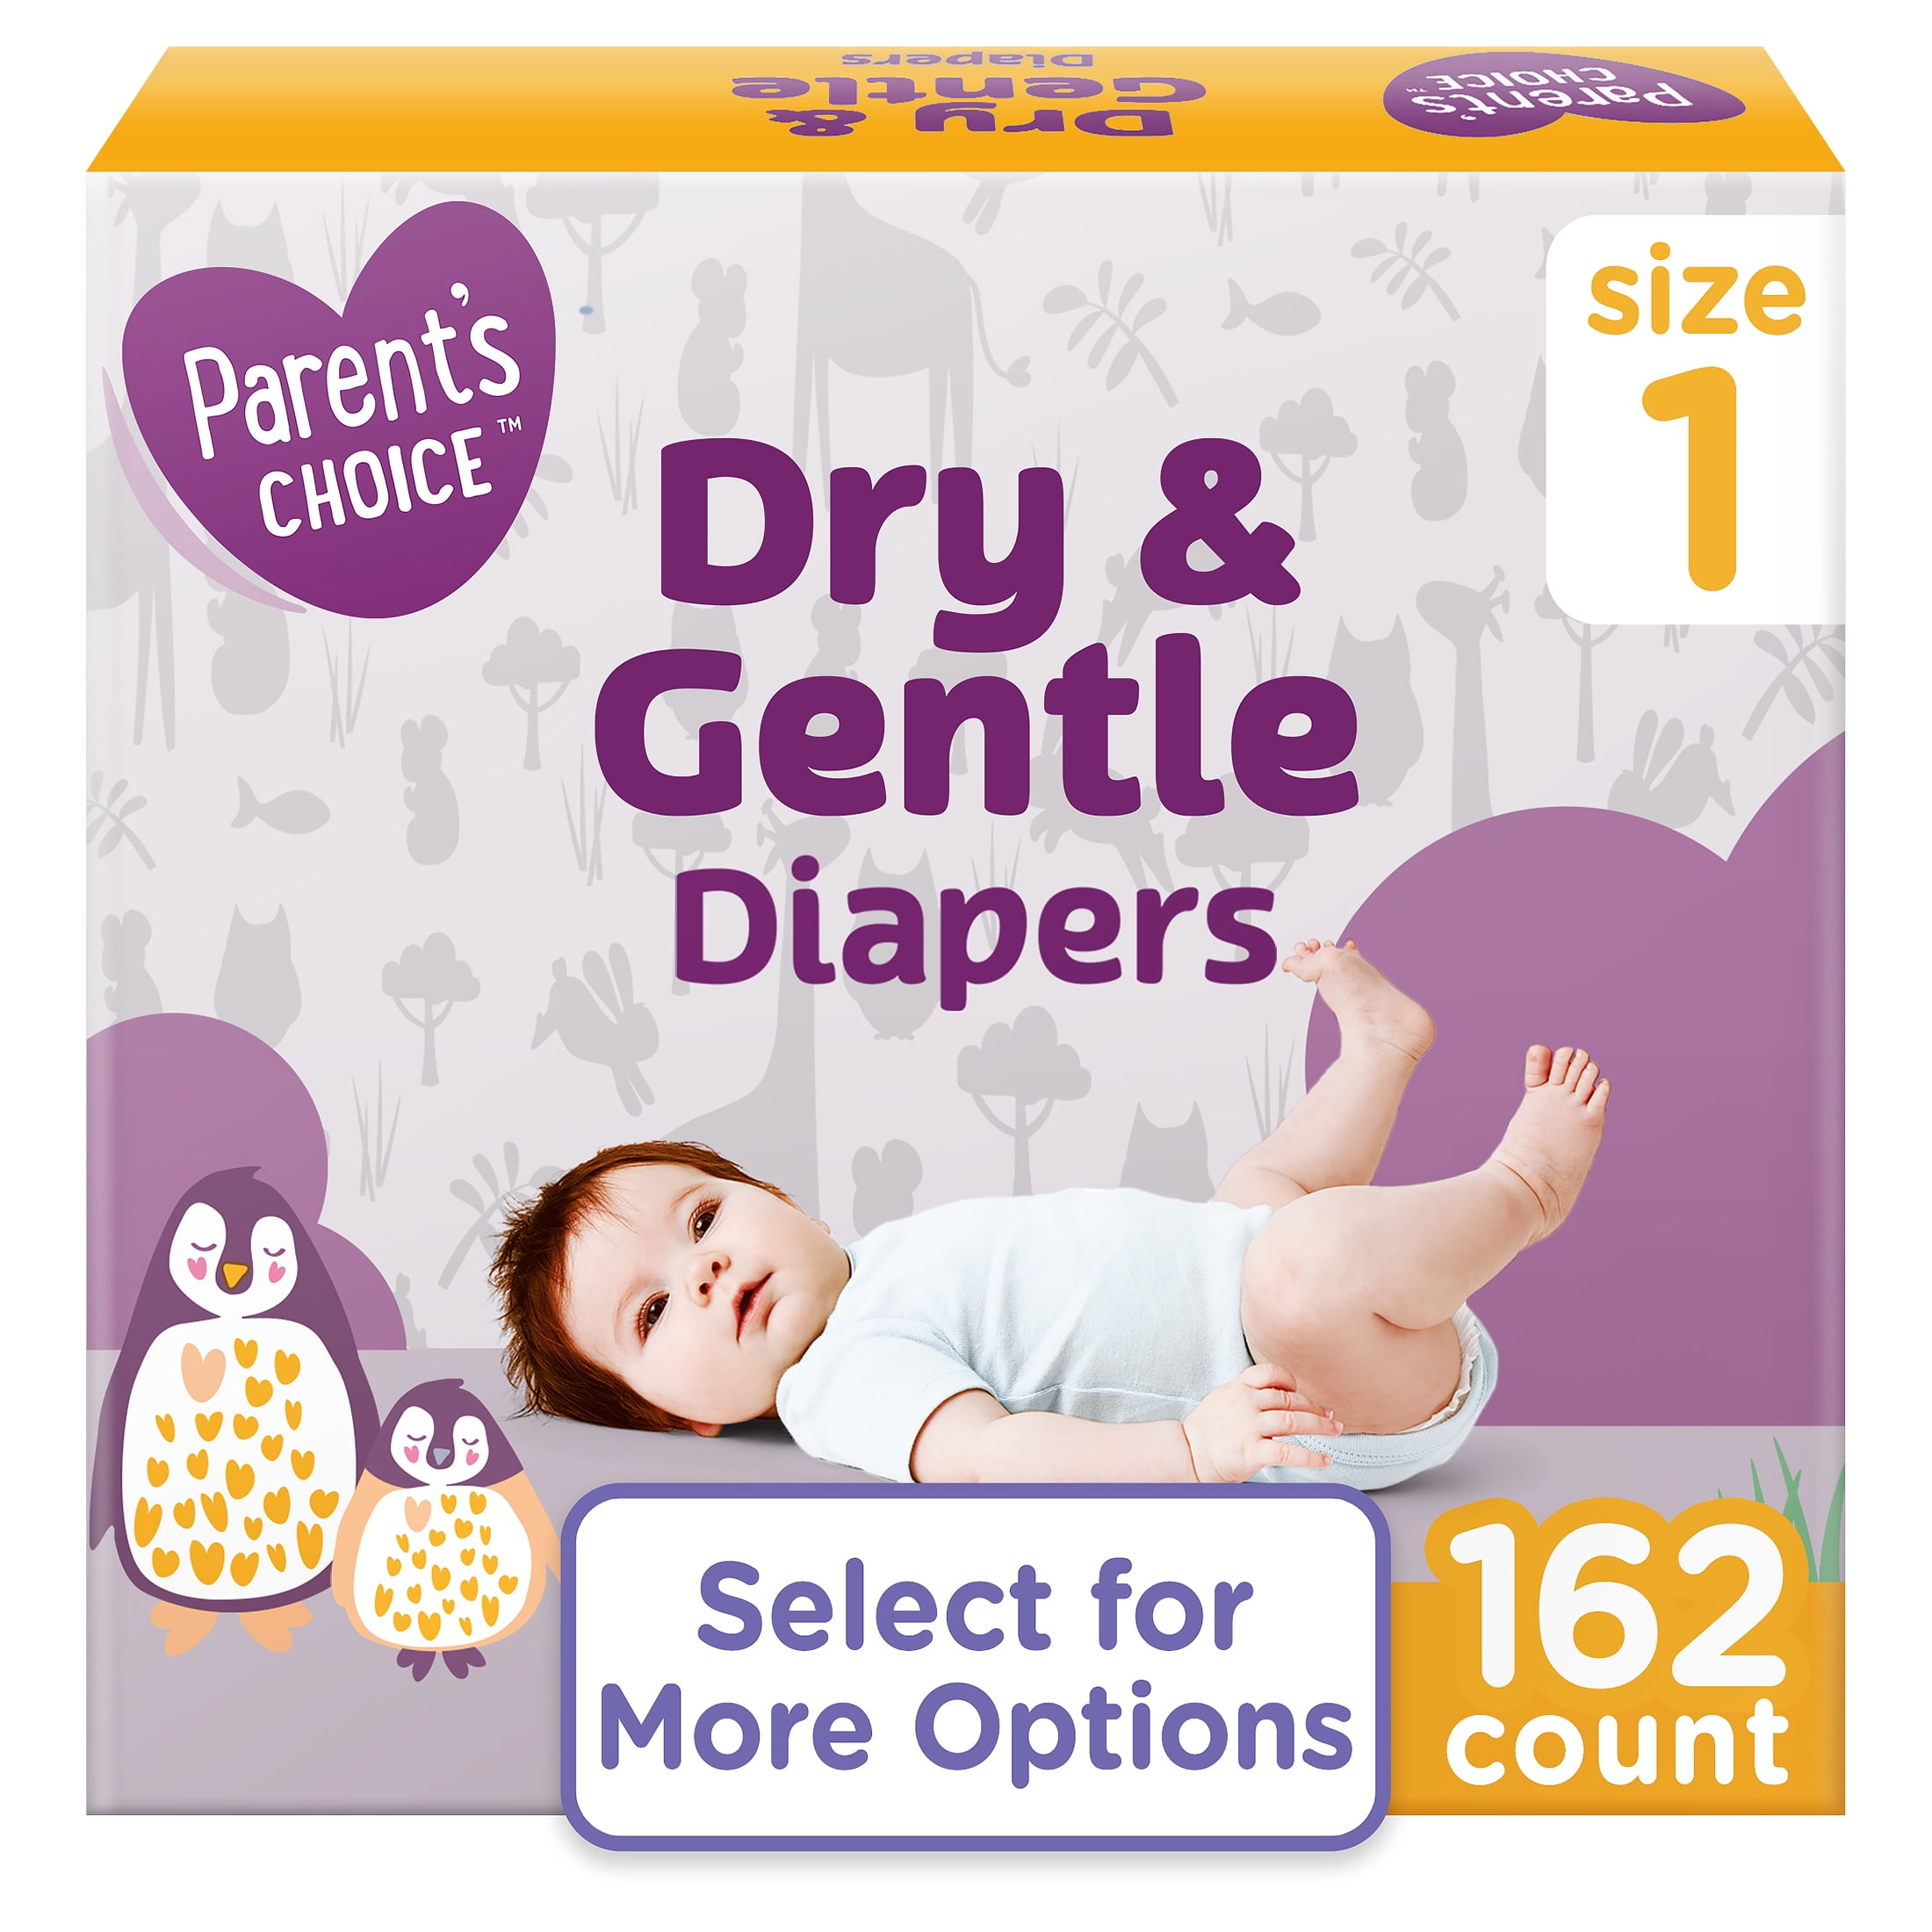 Parent's Choice Dry & Gentle Diapers Size 1, 162 Count (Select for More Options)